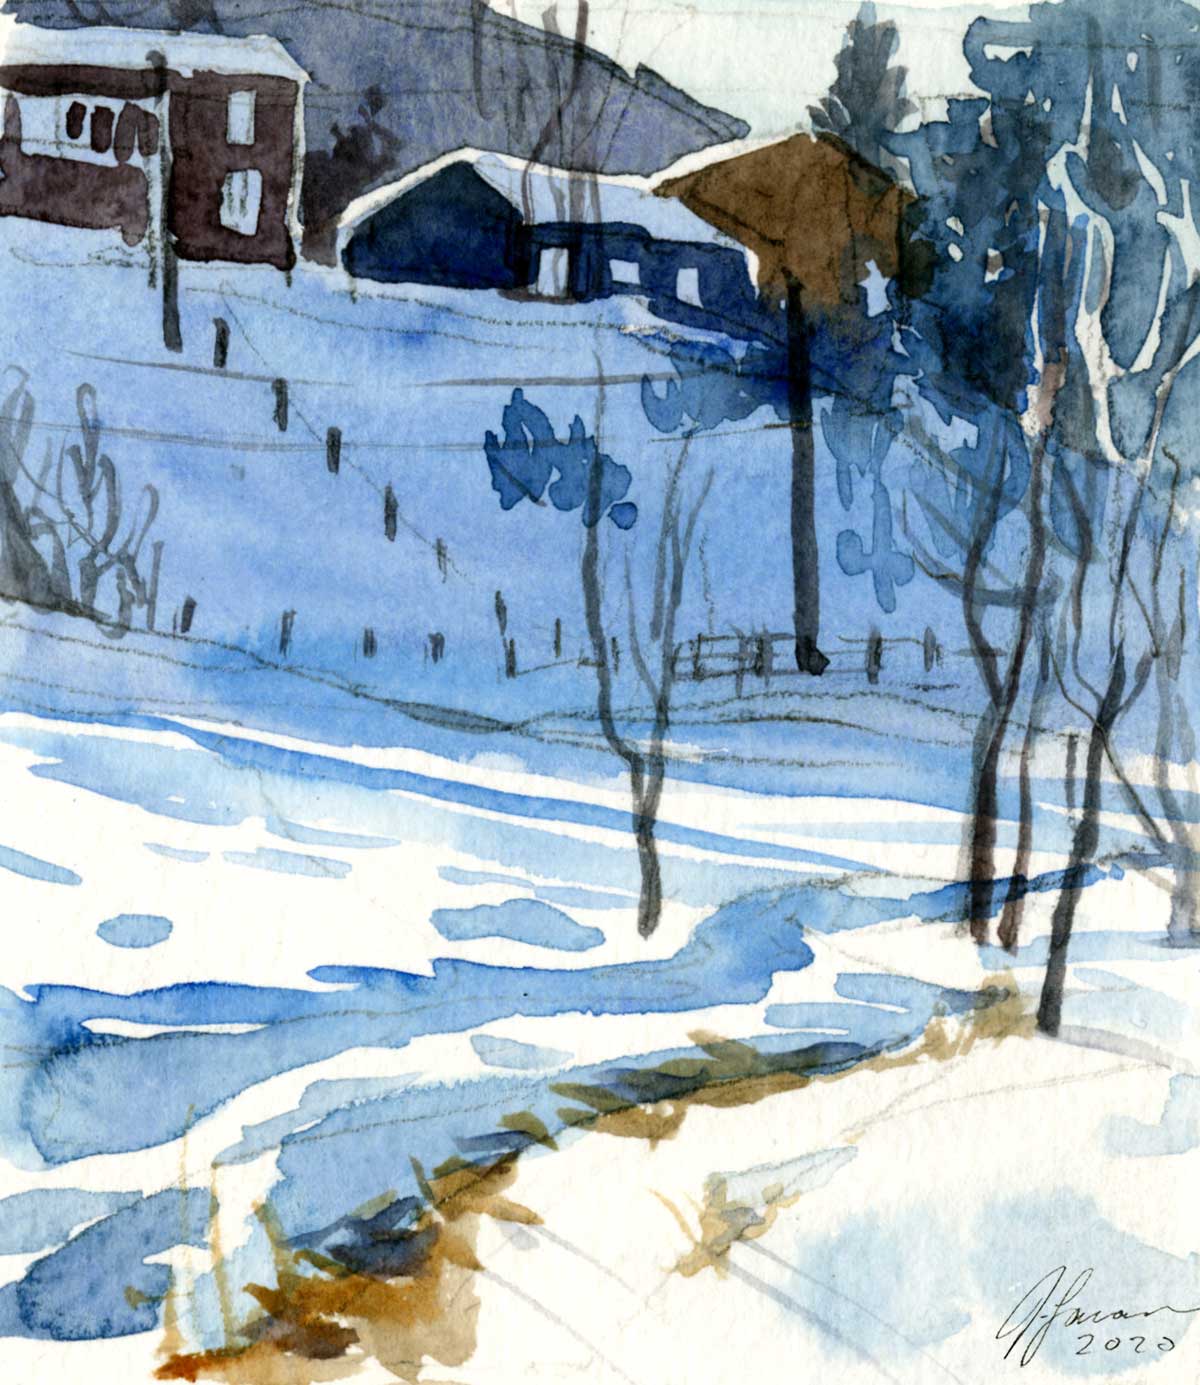 Watercolor sketch of houses on a ridgeline with a snowy field below streaked with blue shadows